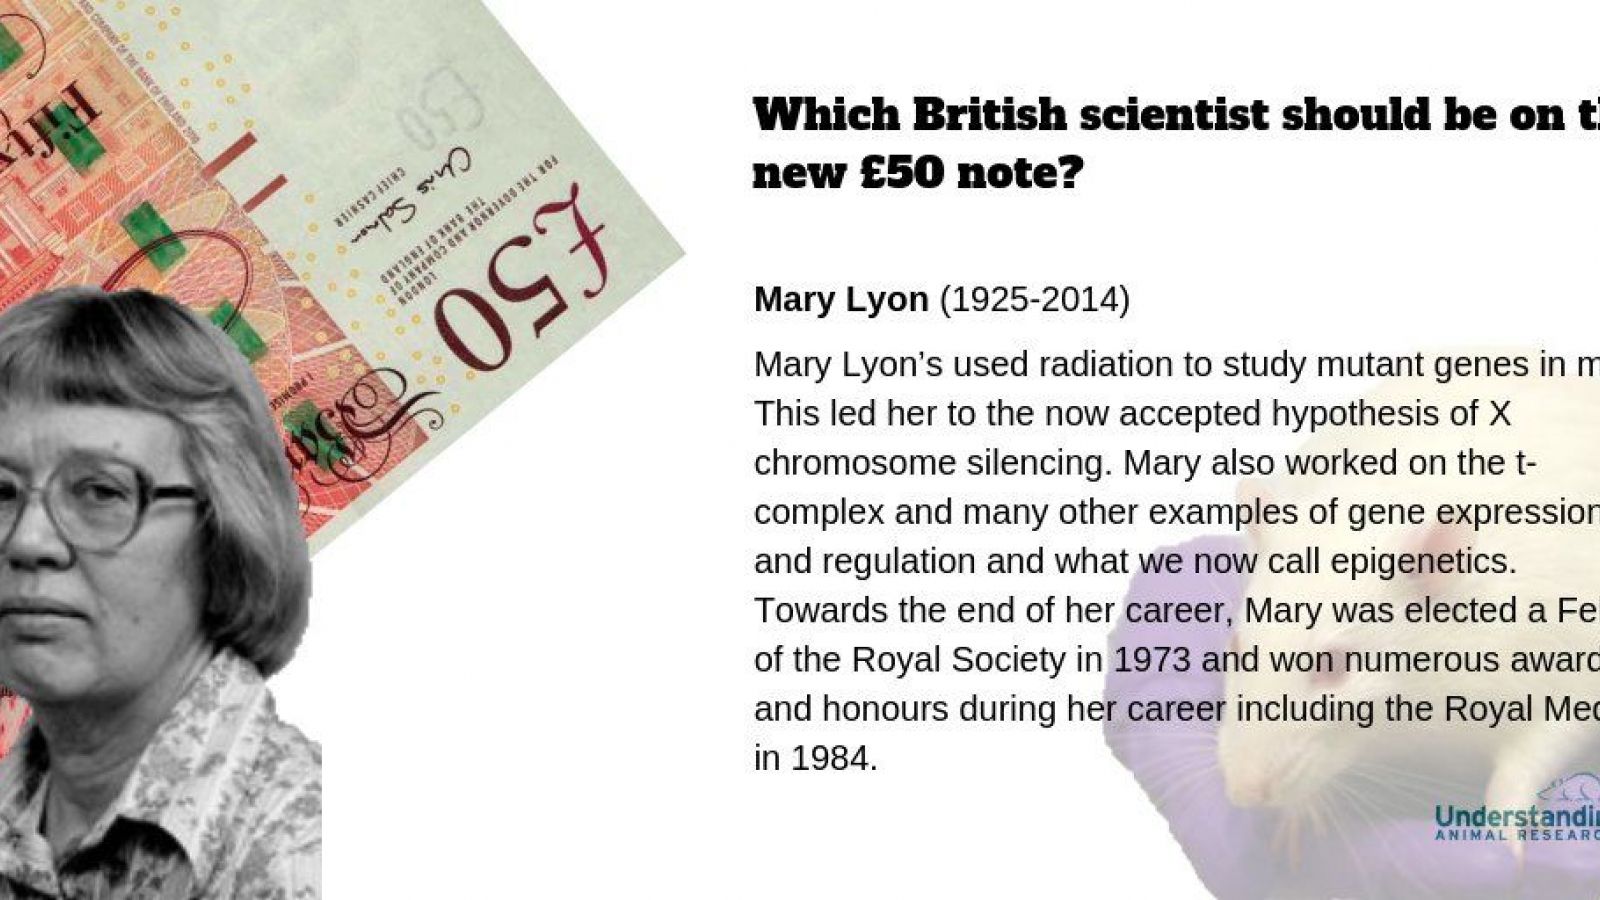 Vote animal research scientist for new £50 note